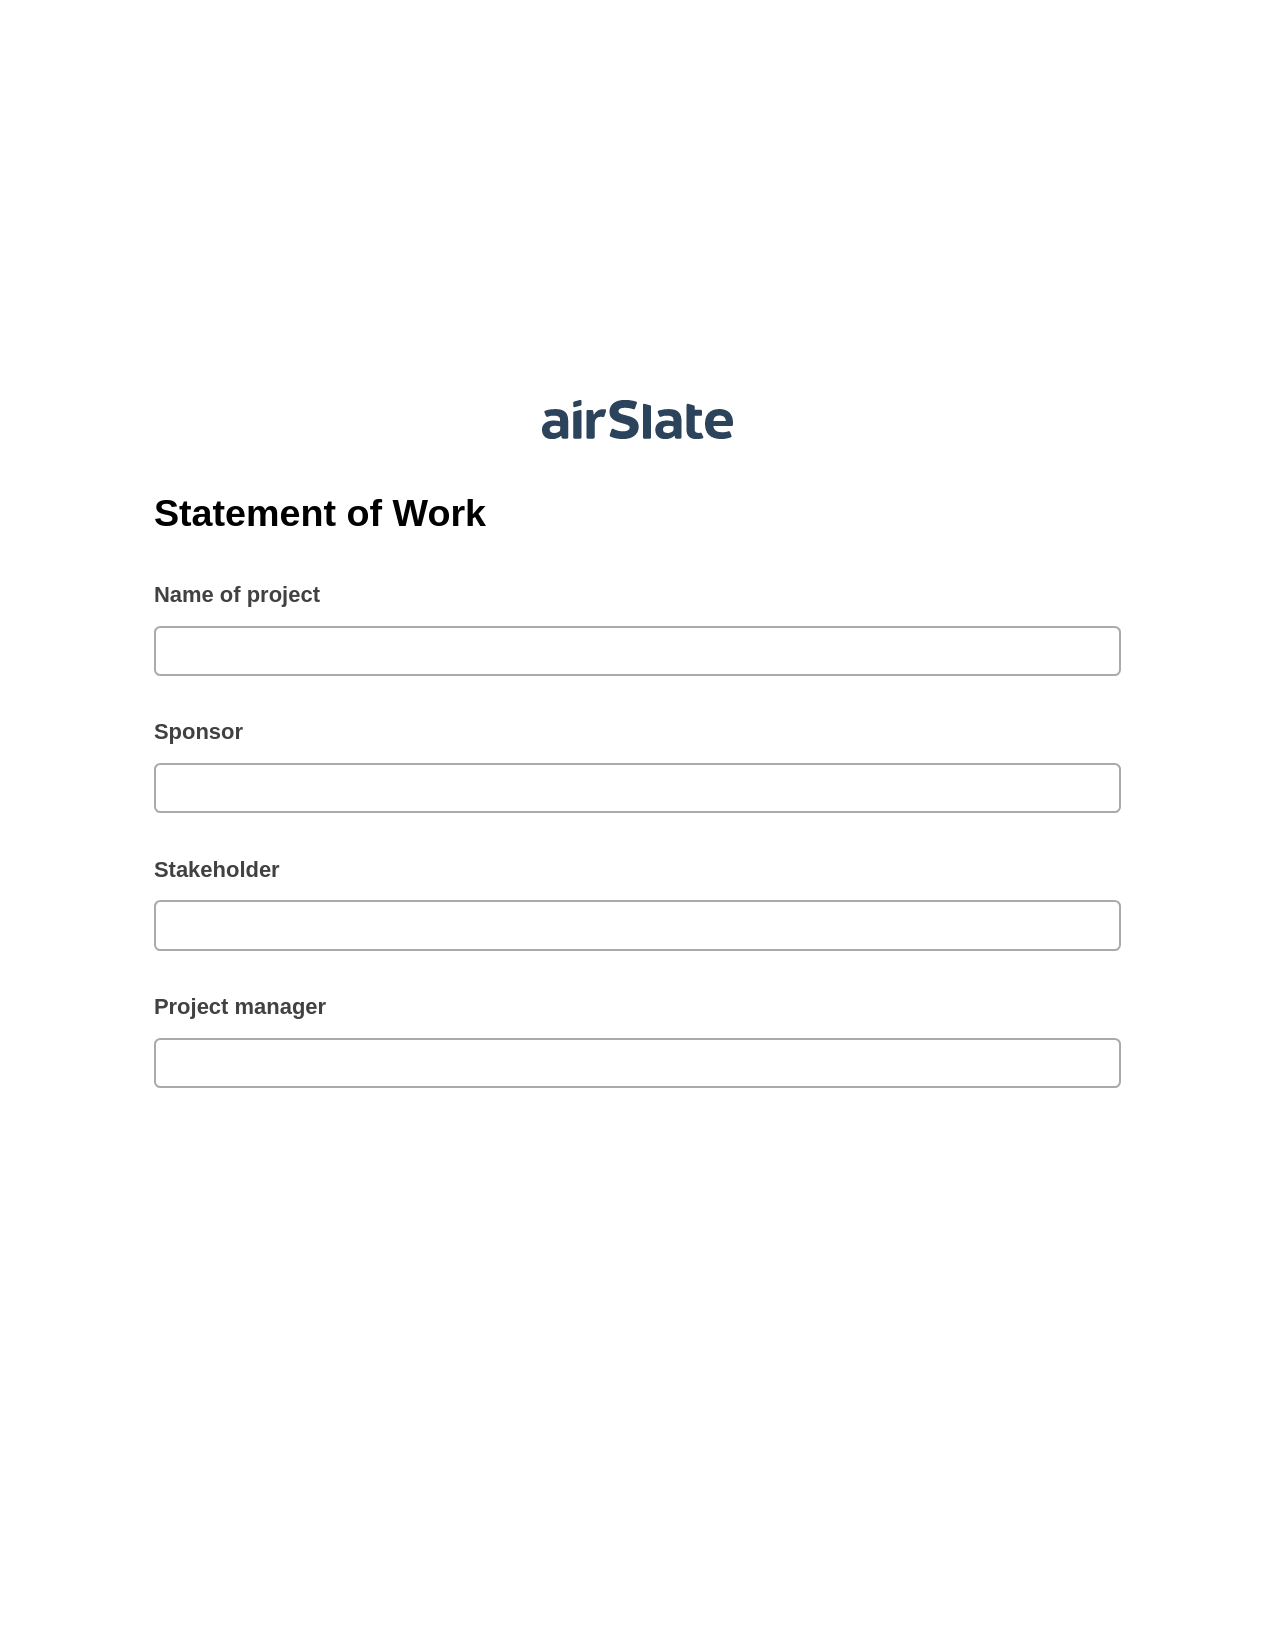 Statement of Work Pre-fill from MS Dynamics 365 Records DEPRECATED, Update MS Dynamics 365 Record Bot DEPRECATED, Email Notification Postfinish Bot